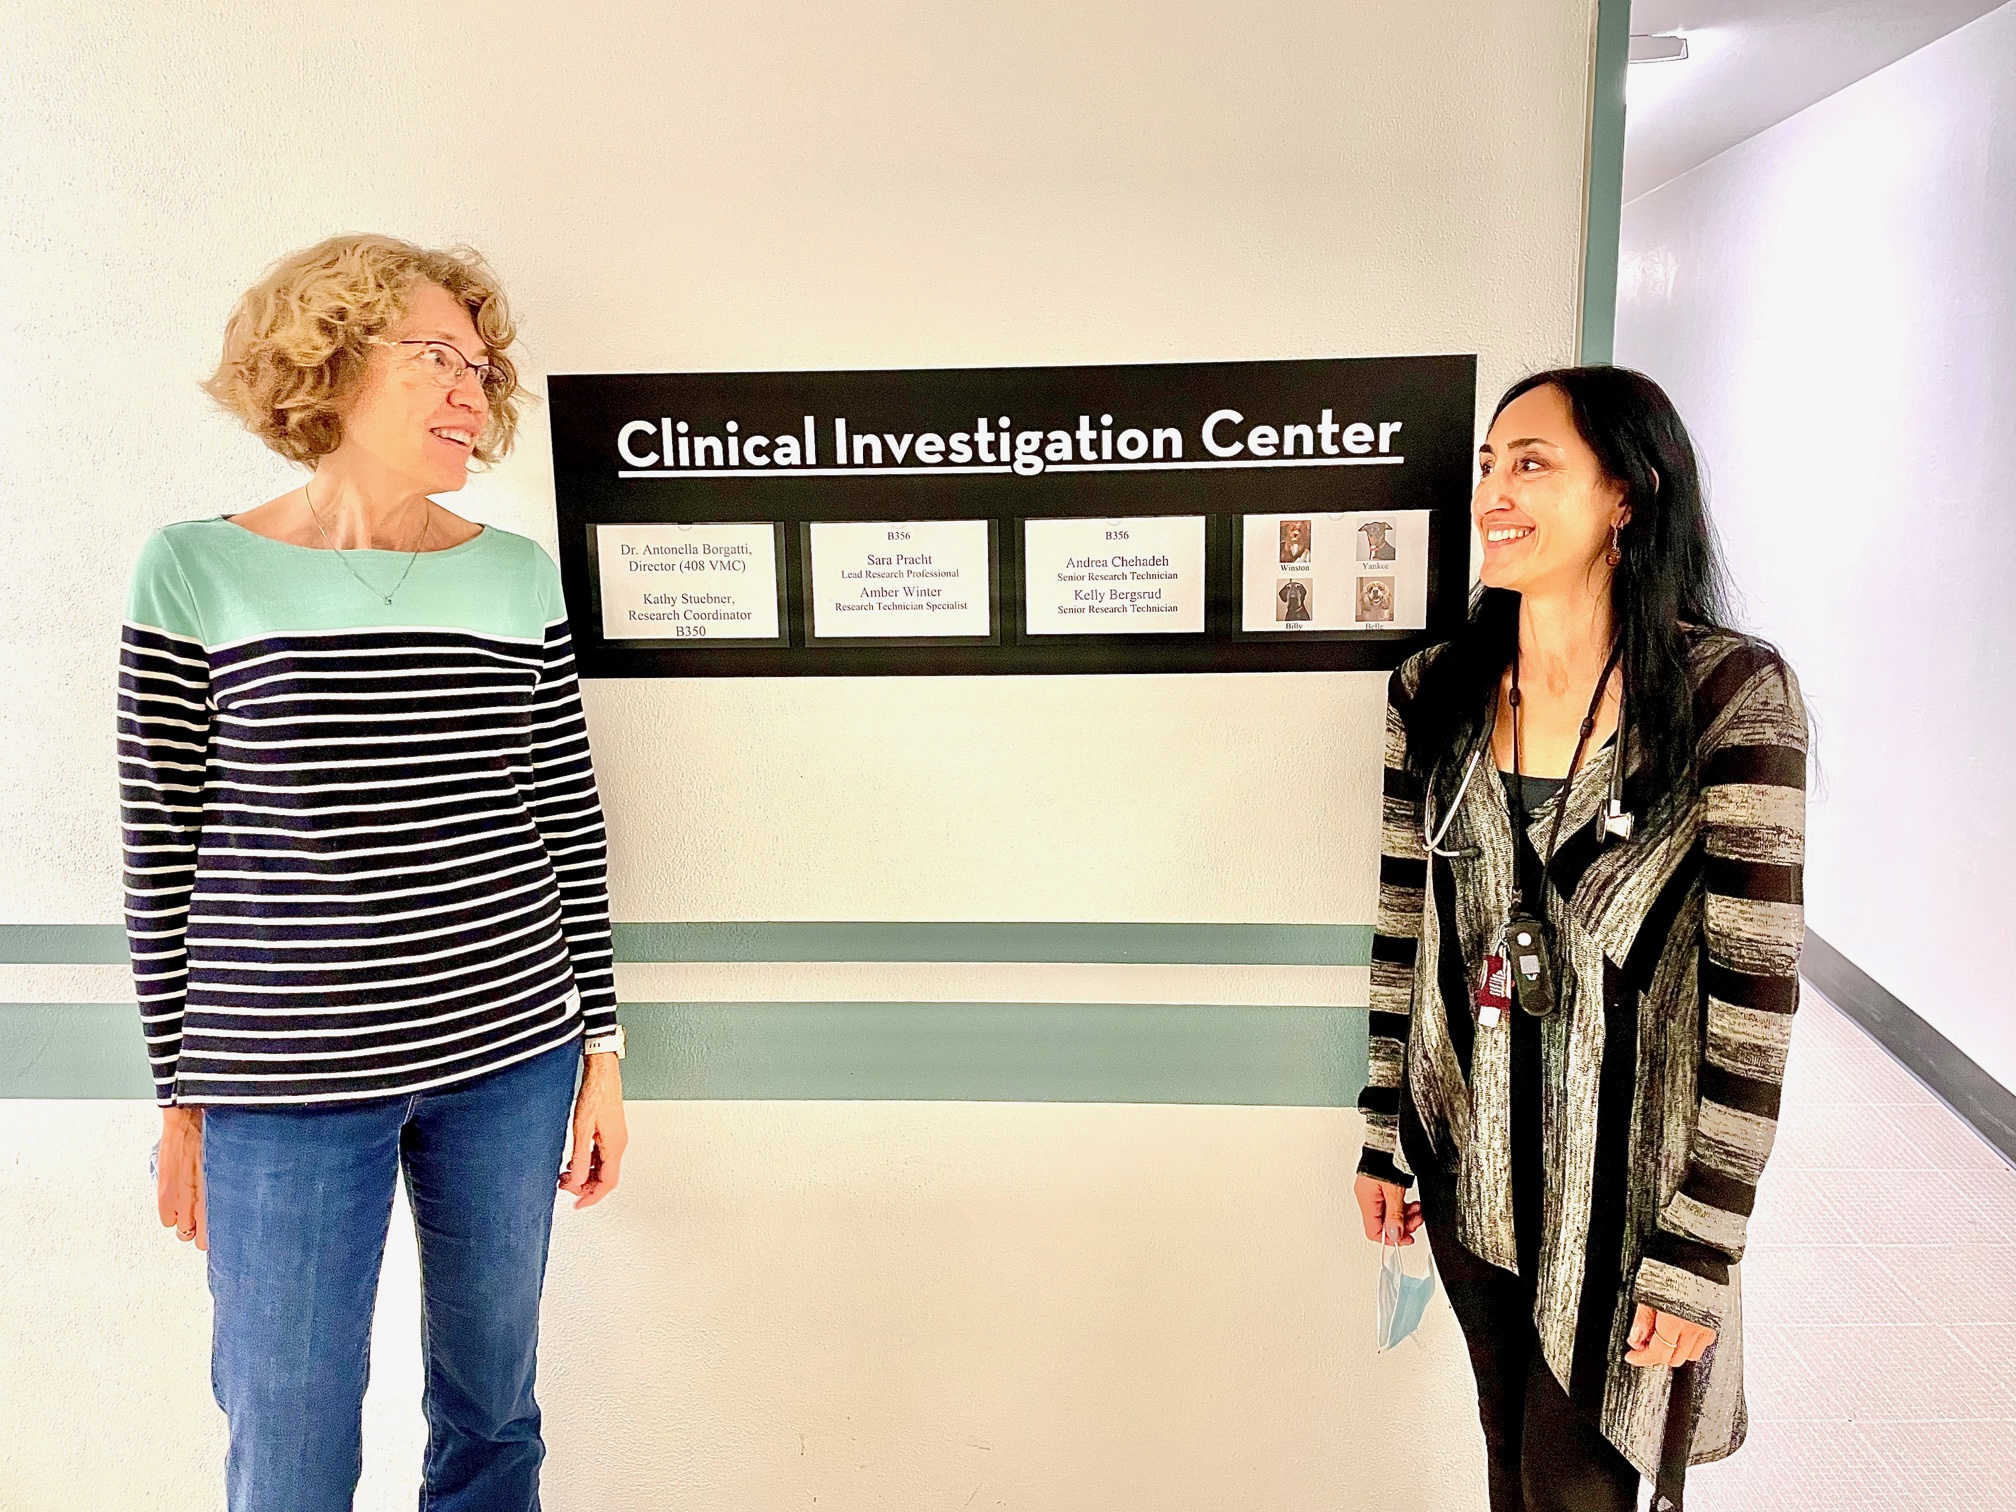 Research Manager Kathy Stuebner and Director Antonella Borgatti chat at the entrance to the Clinical Investigation Center on the St. Paul Campus.